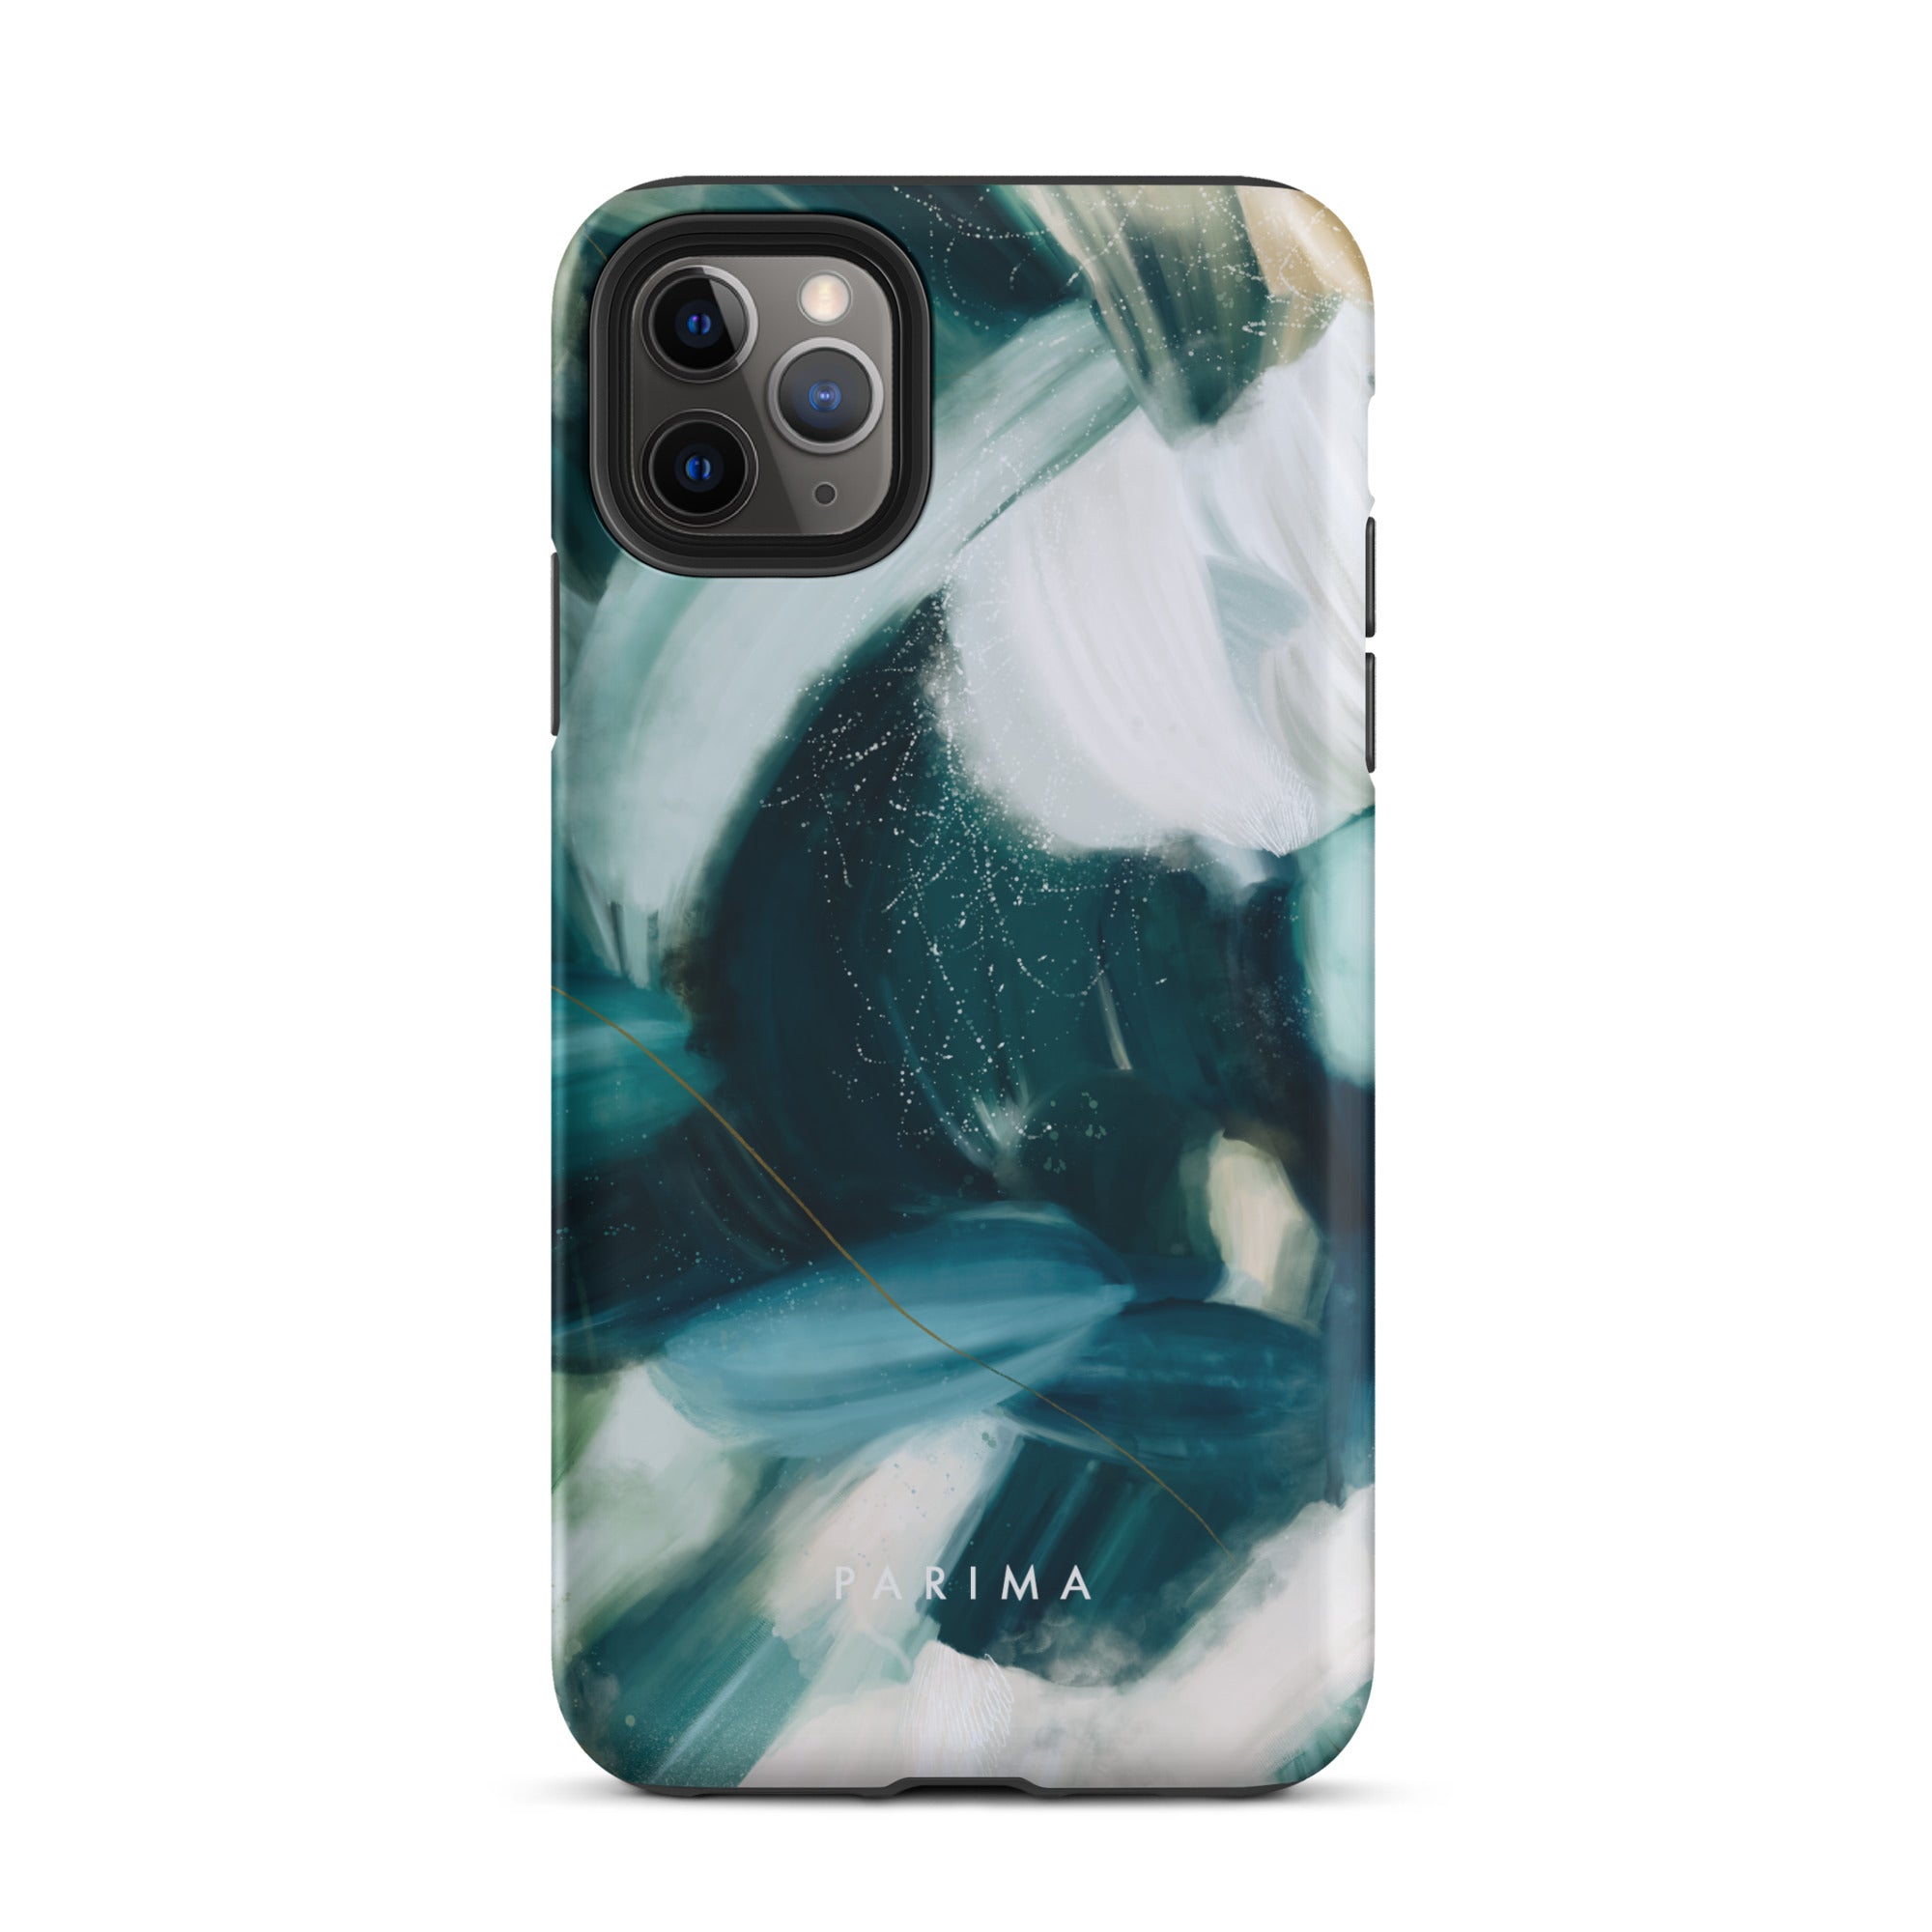 Caspian, green and blue abstract art - iPhone 11 Pro Max tough case by Parima Studio